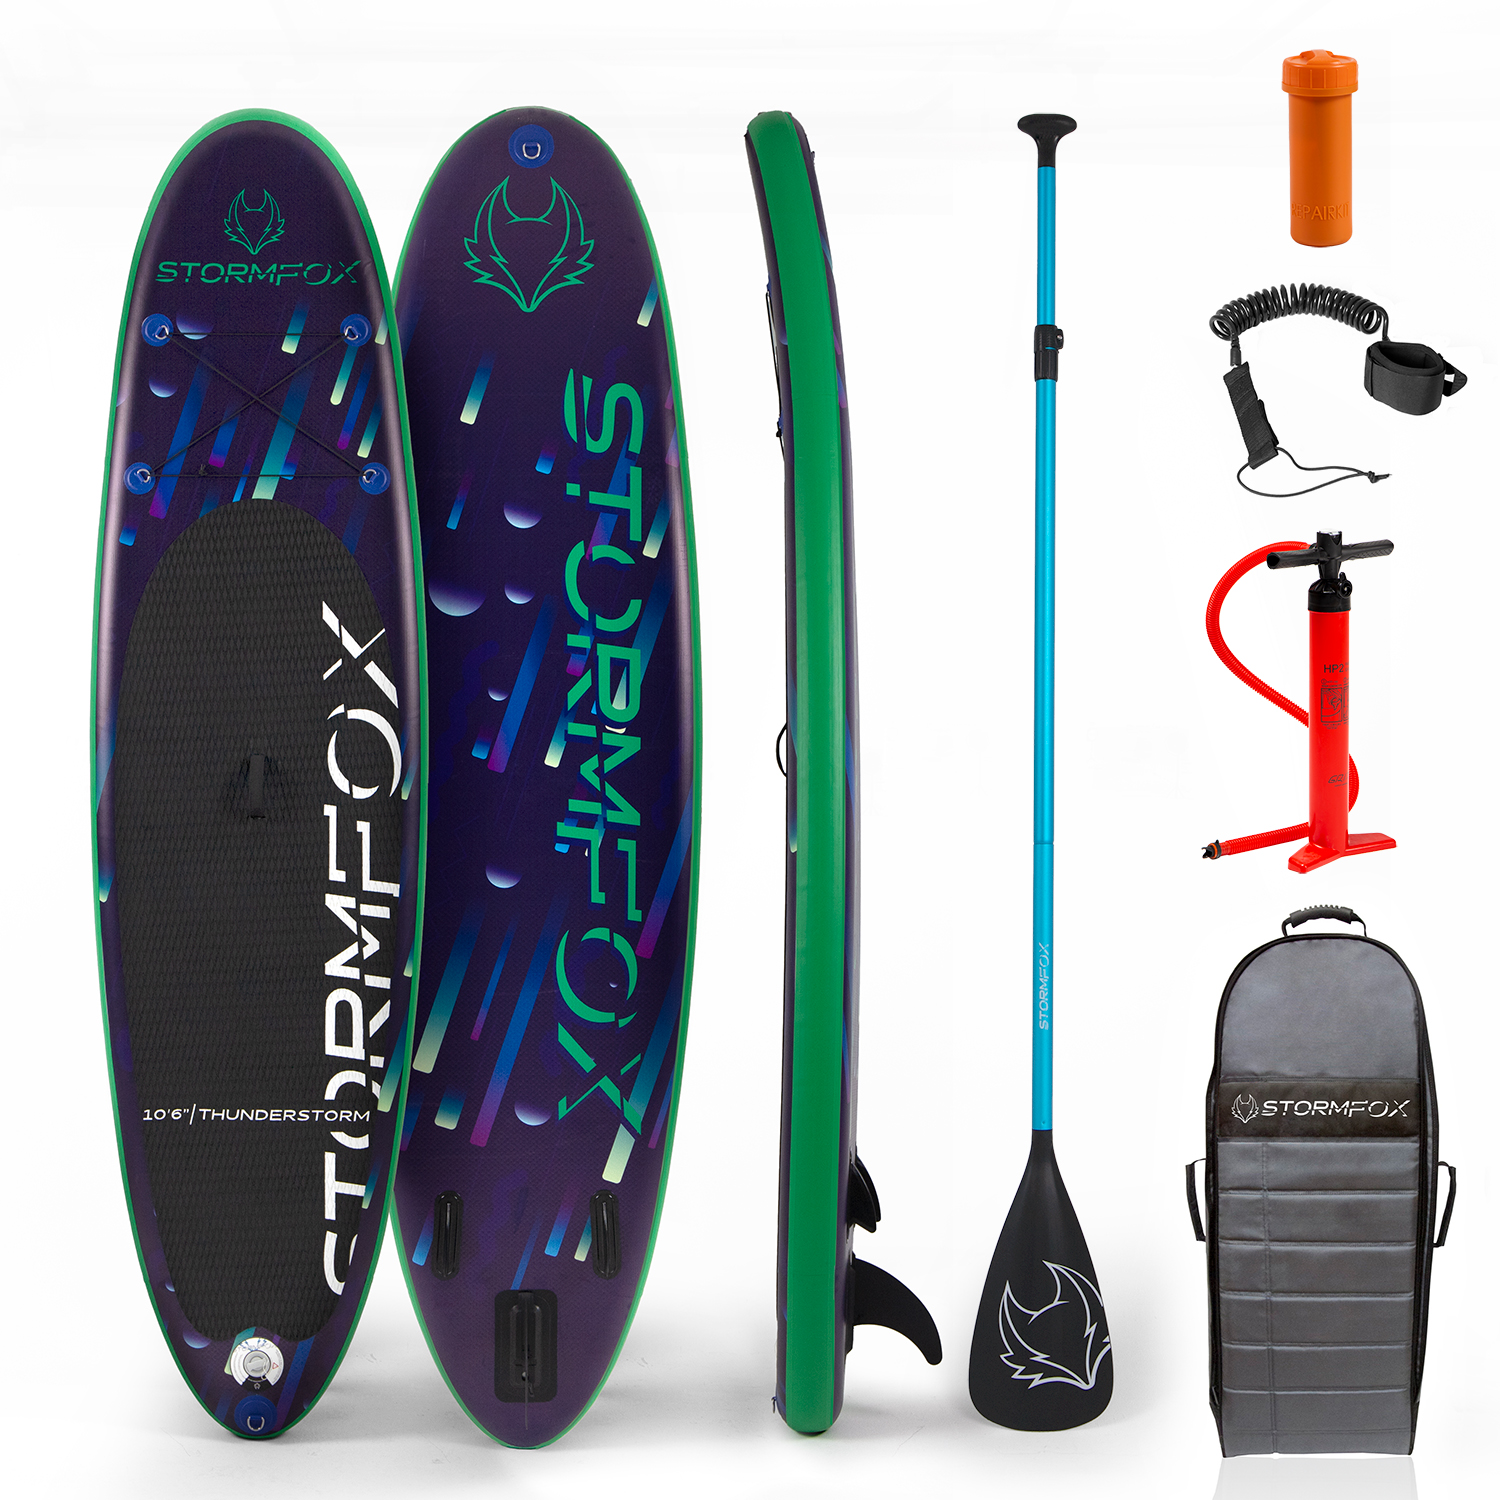 Thunderstorm Stand Up Paddle Board Kit - 10'6